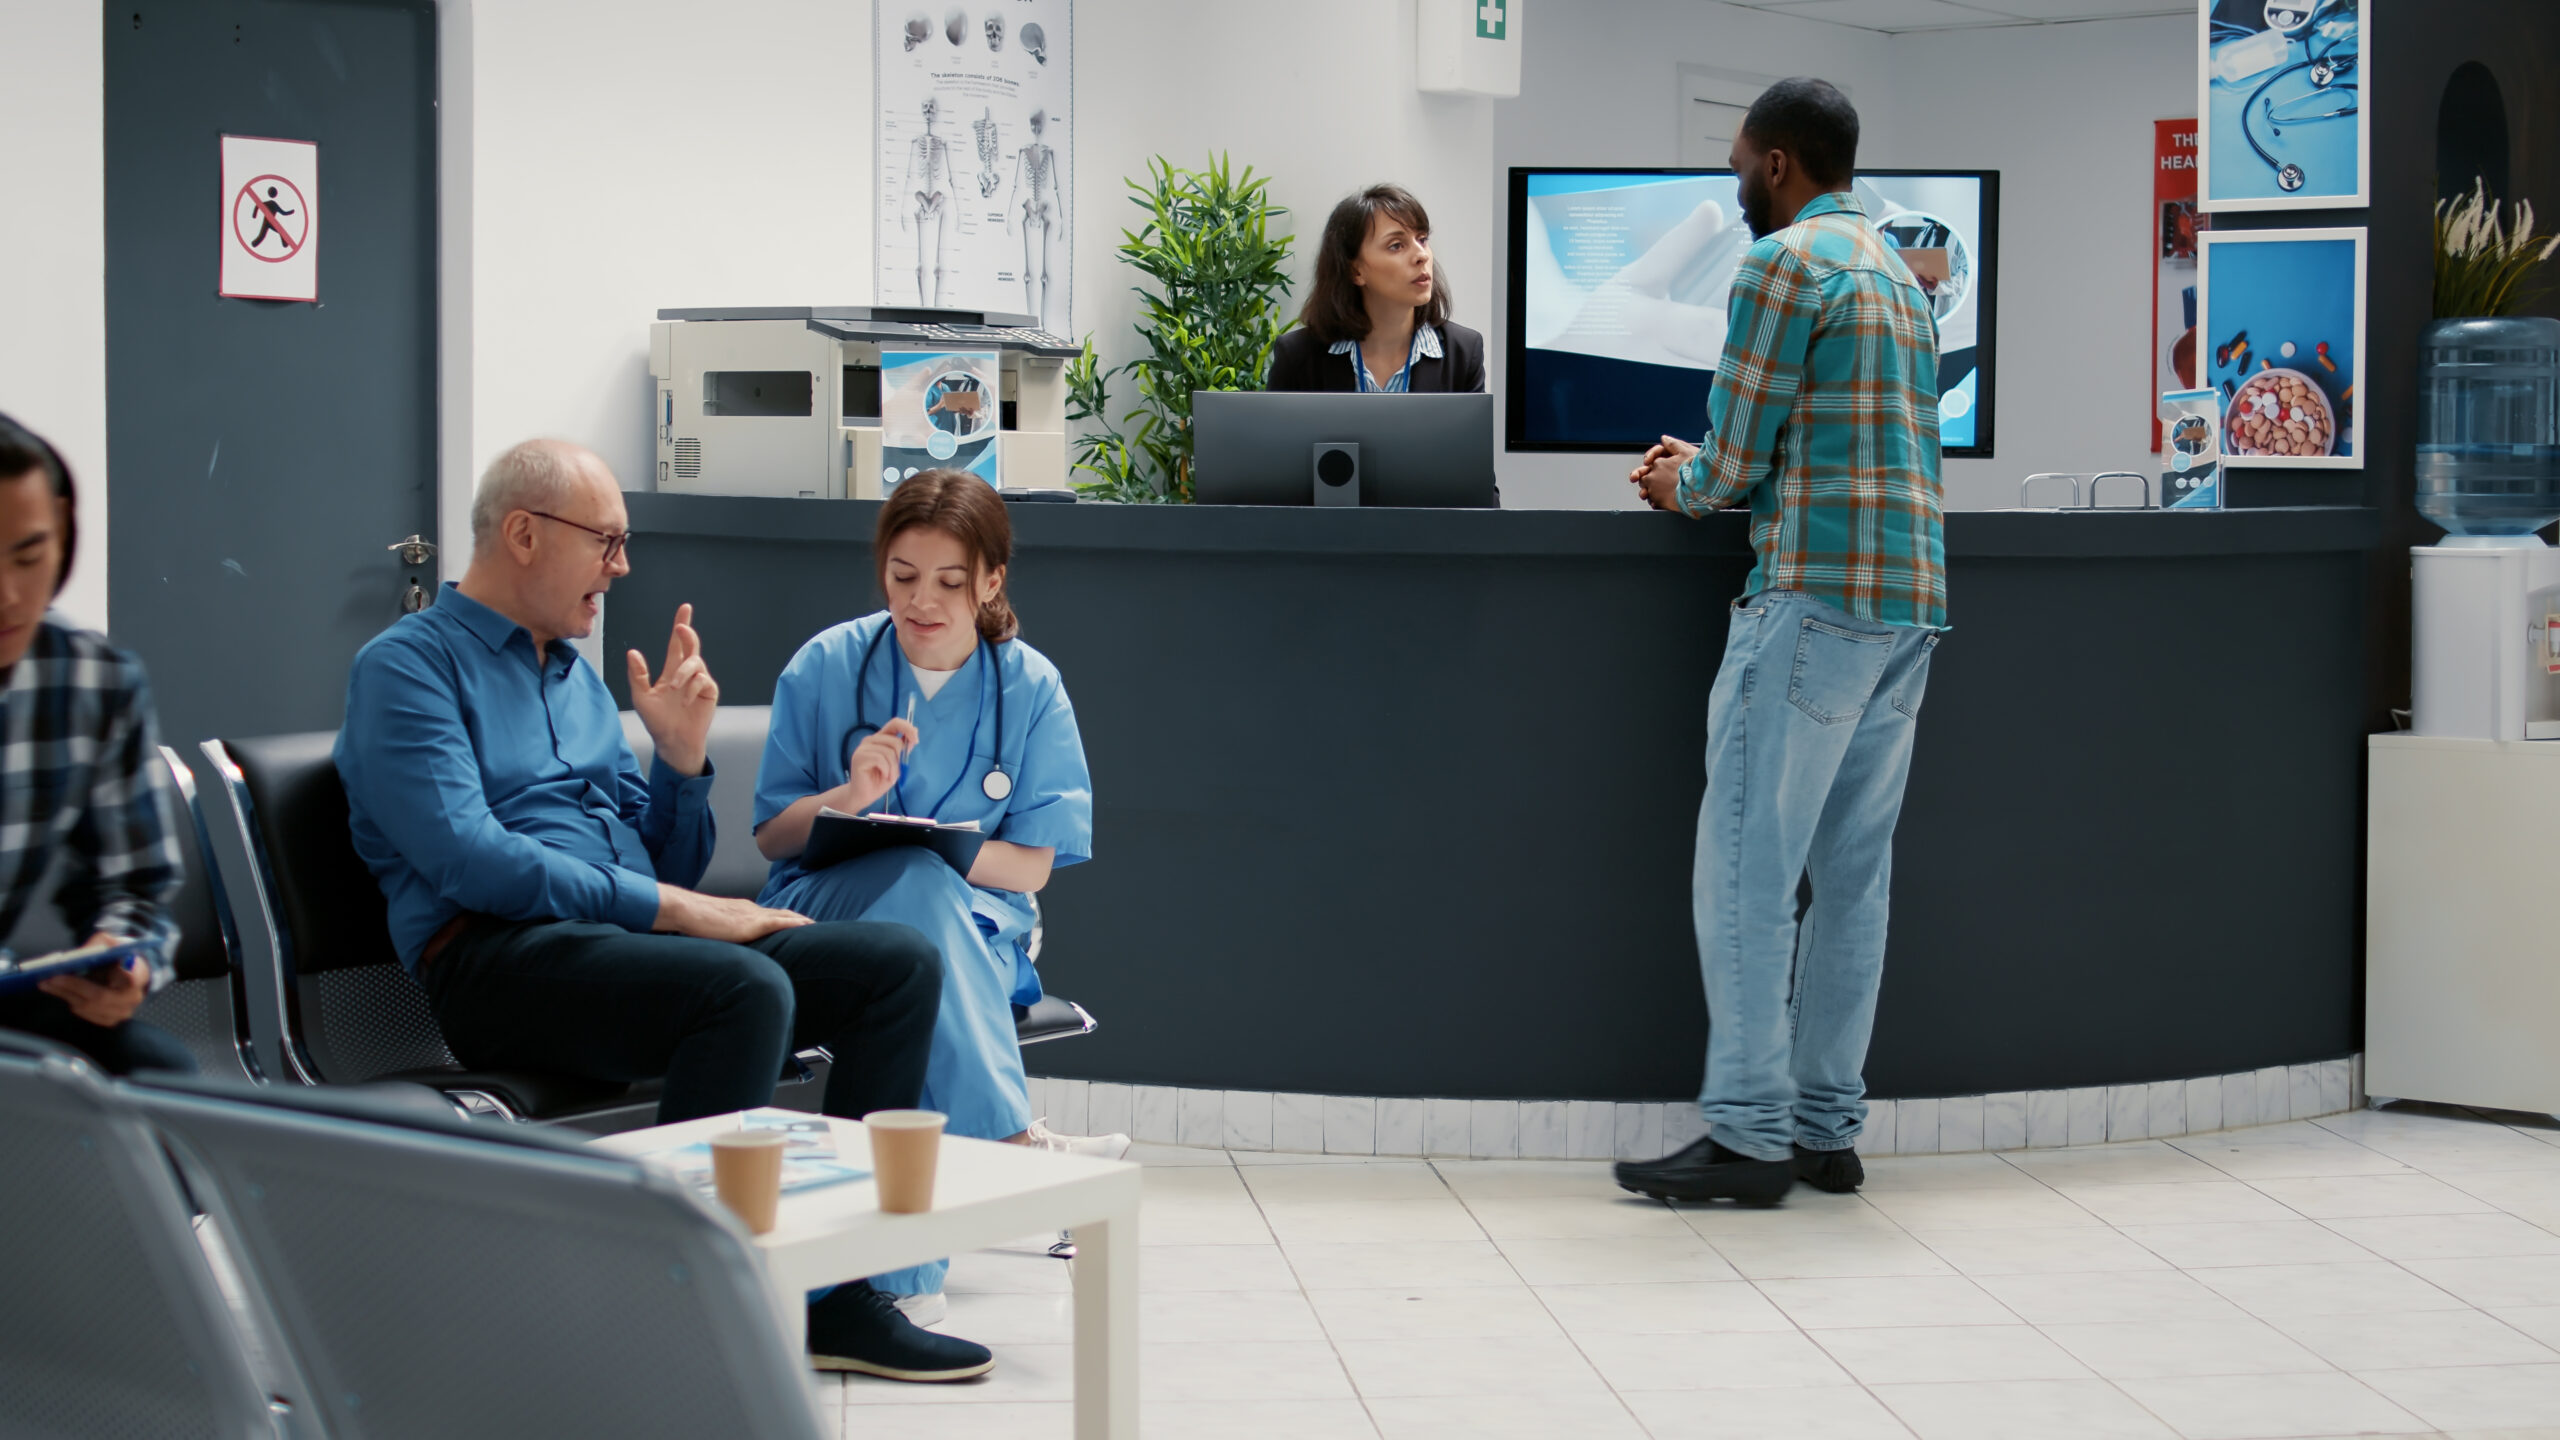 Reception desk with diverse patients waiting in lobby for checkup visit